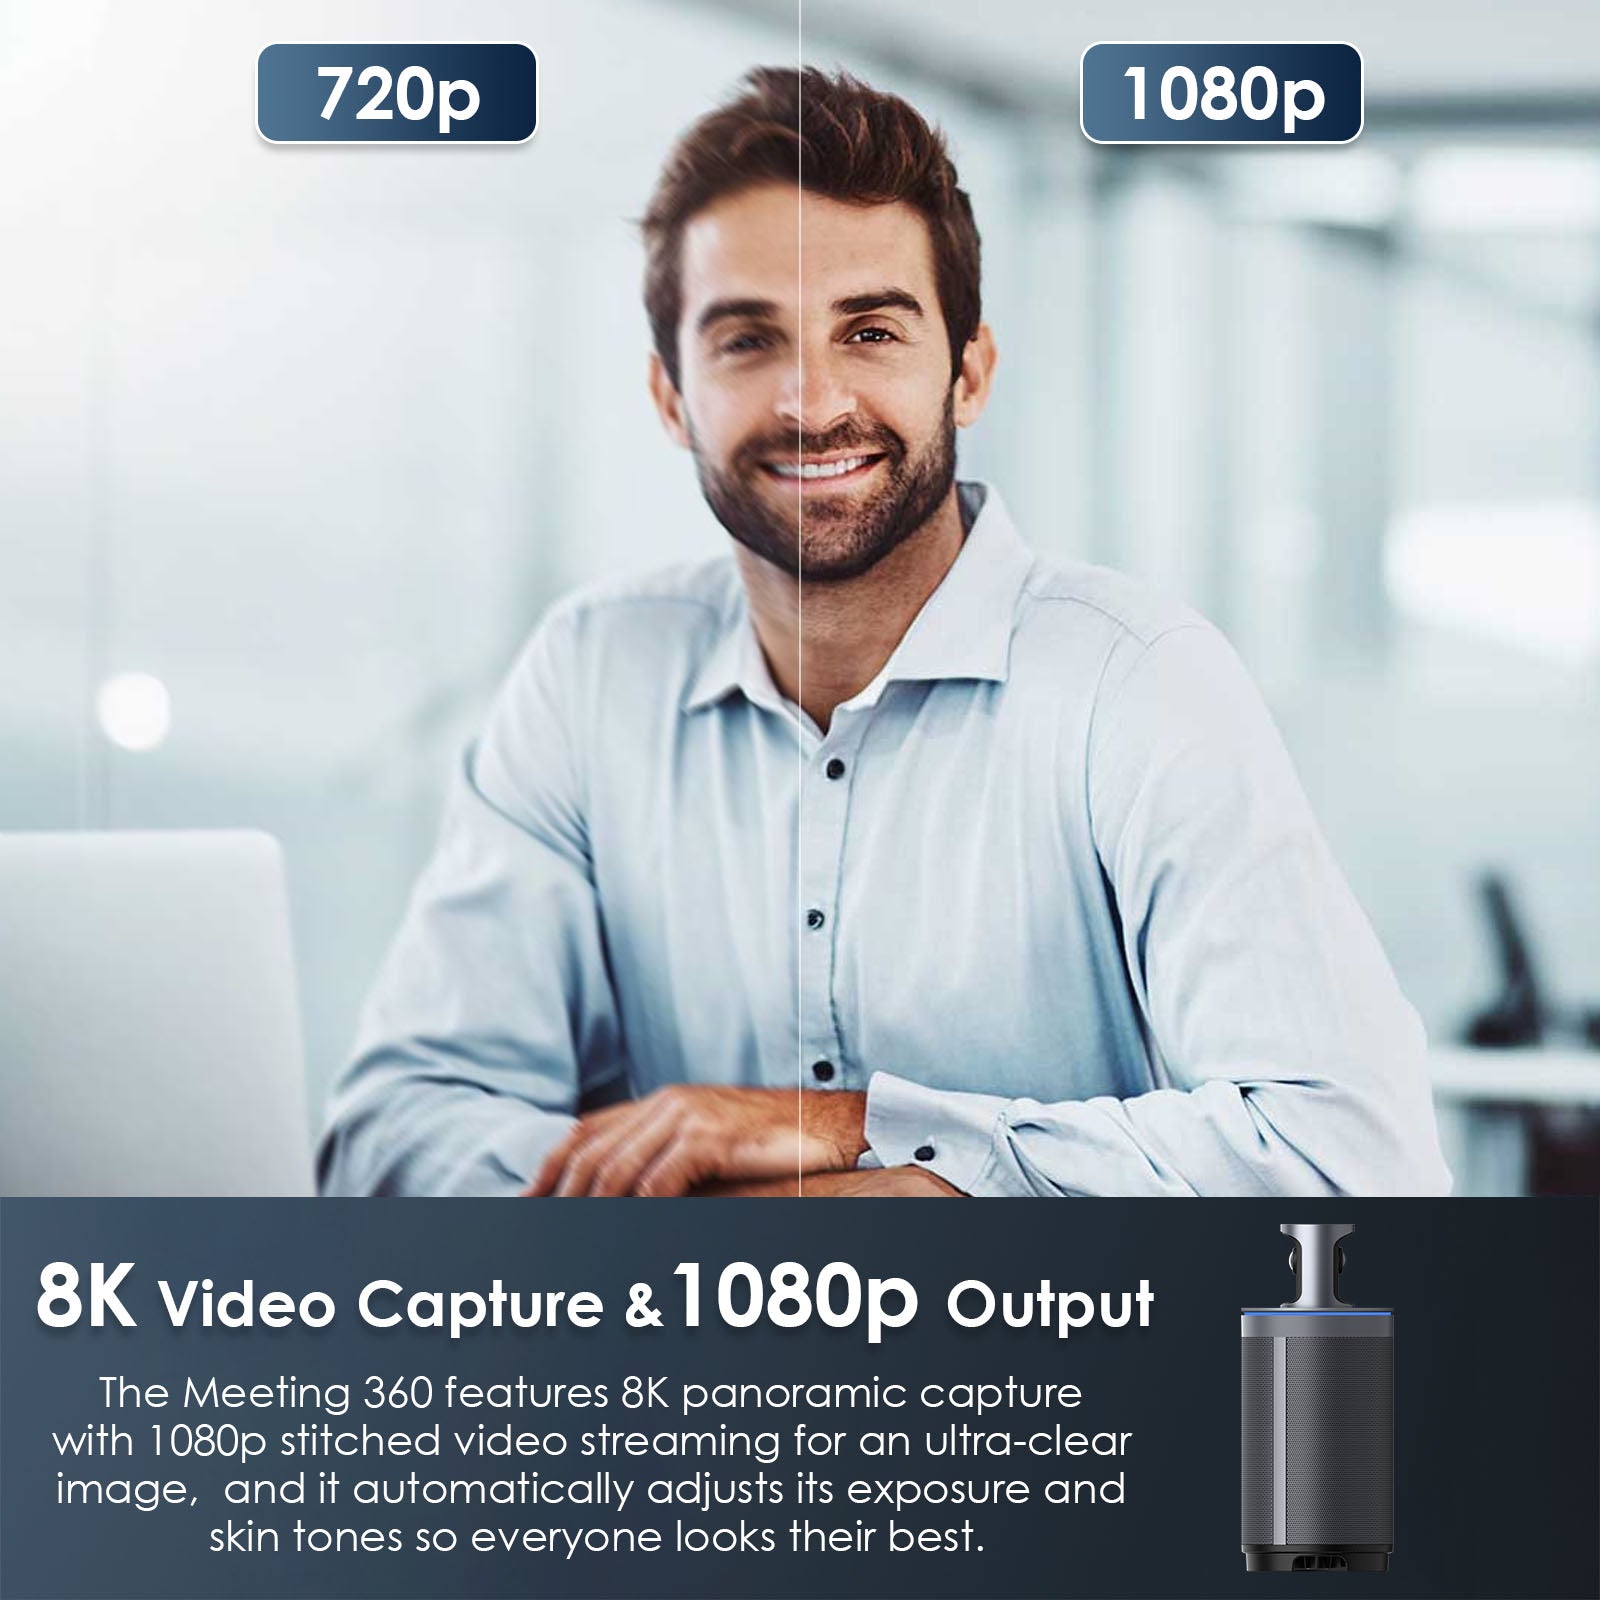 The Conference Camera supports 8K video capture & 1080p output and automatically adjusts exposure